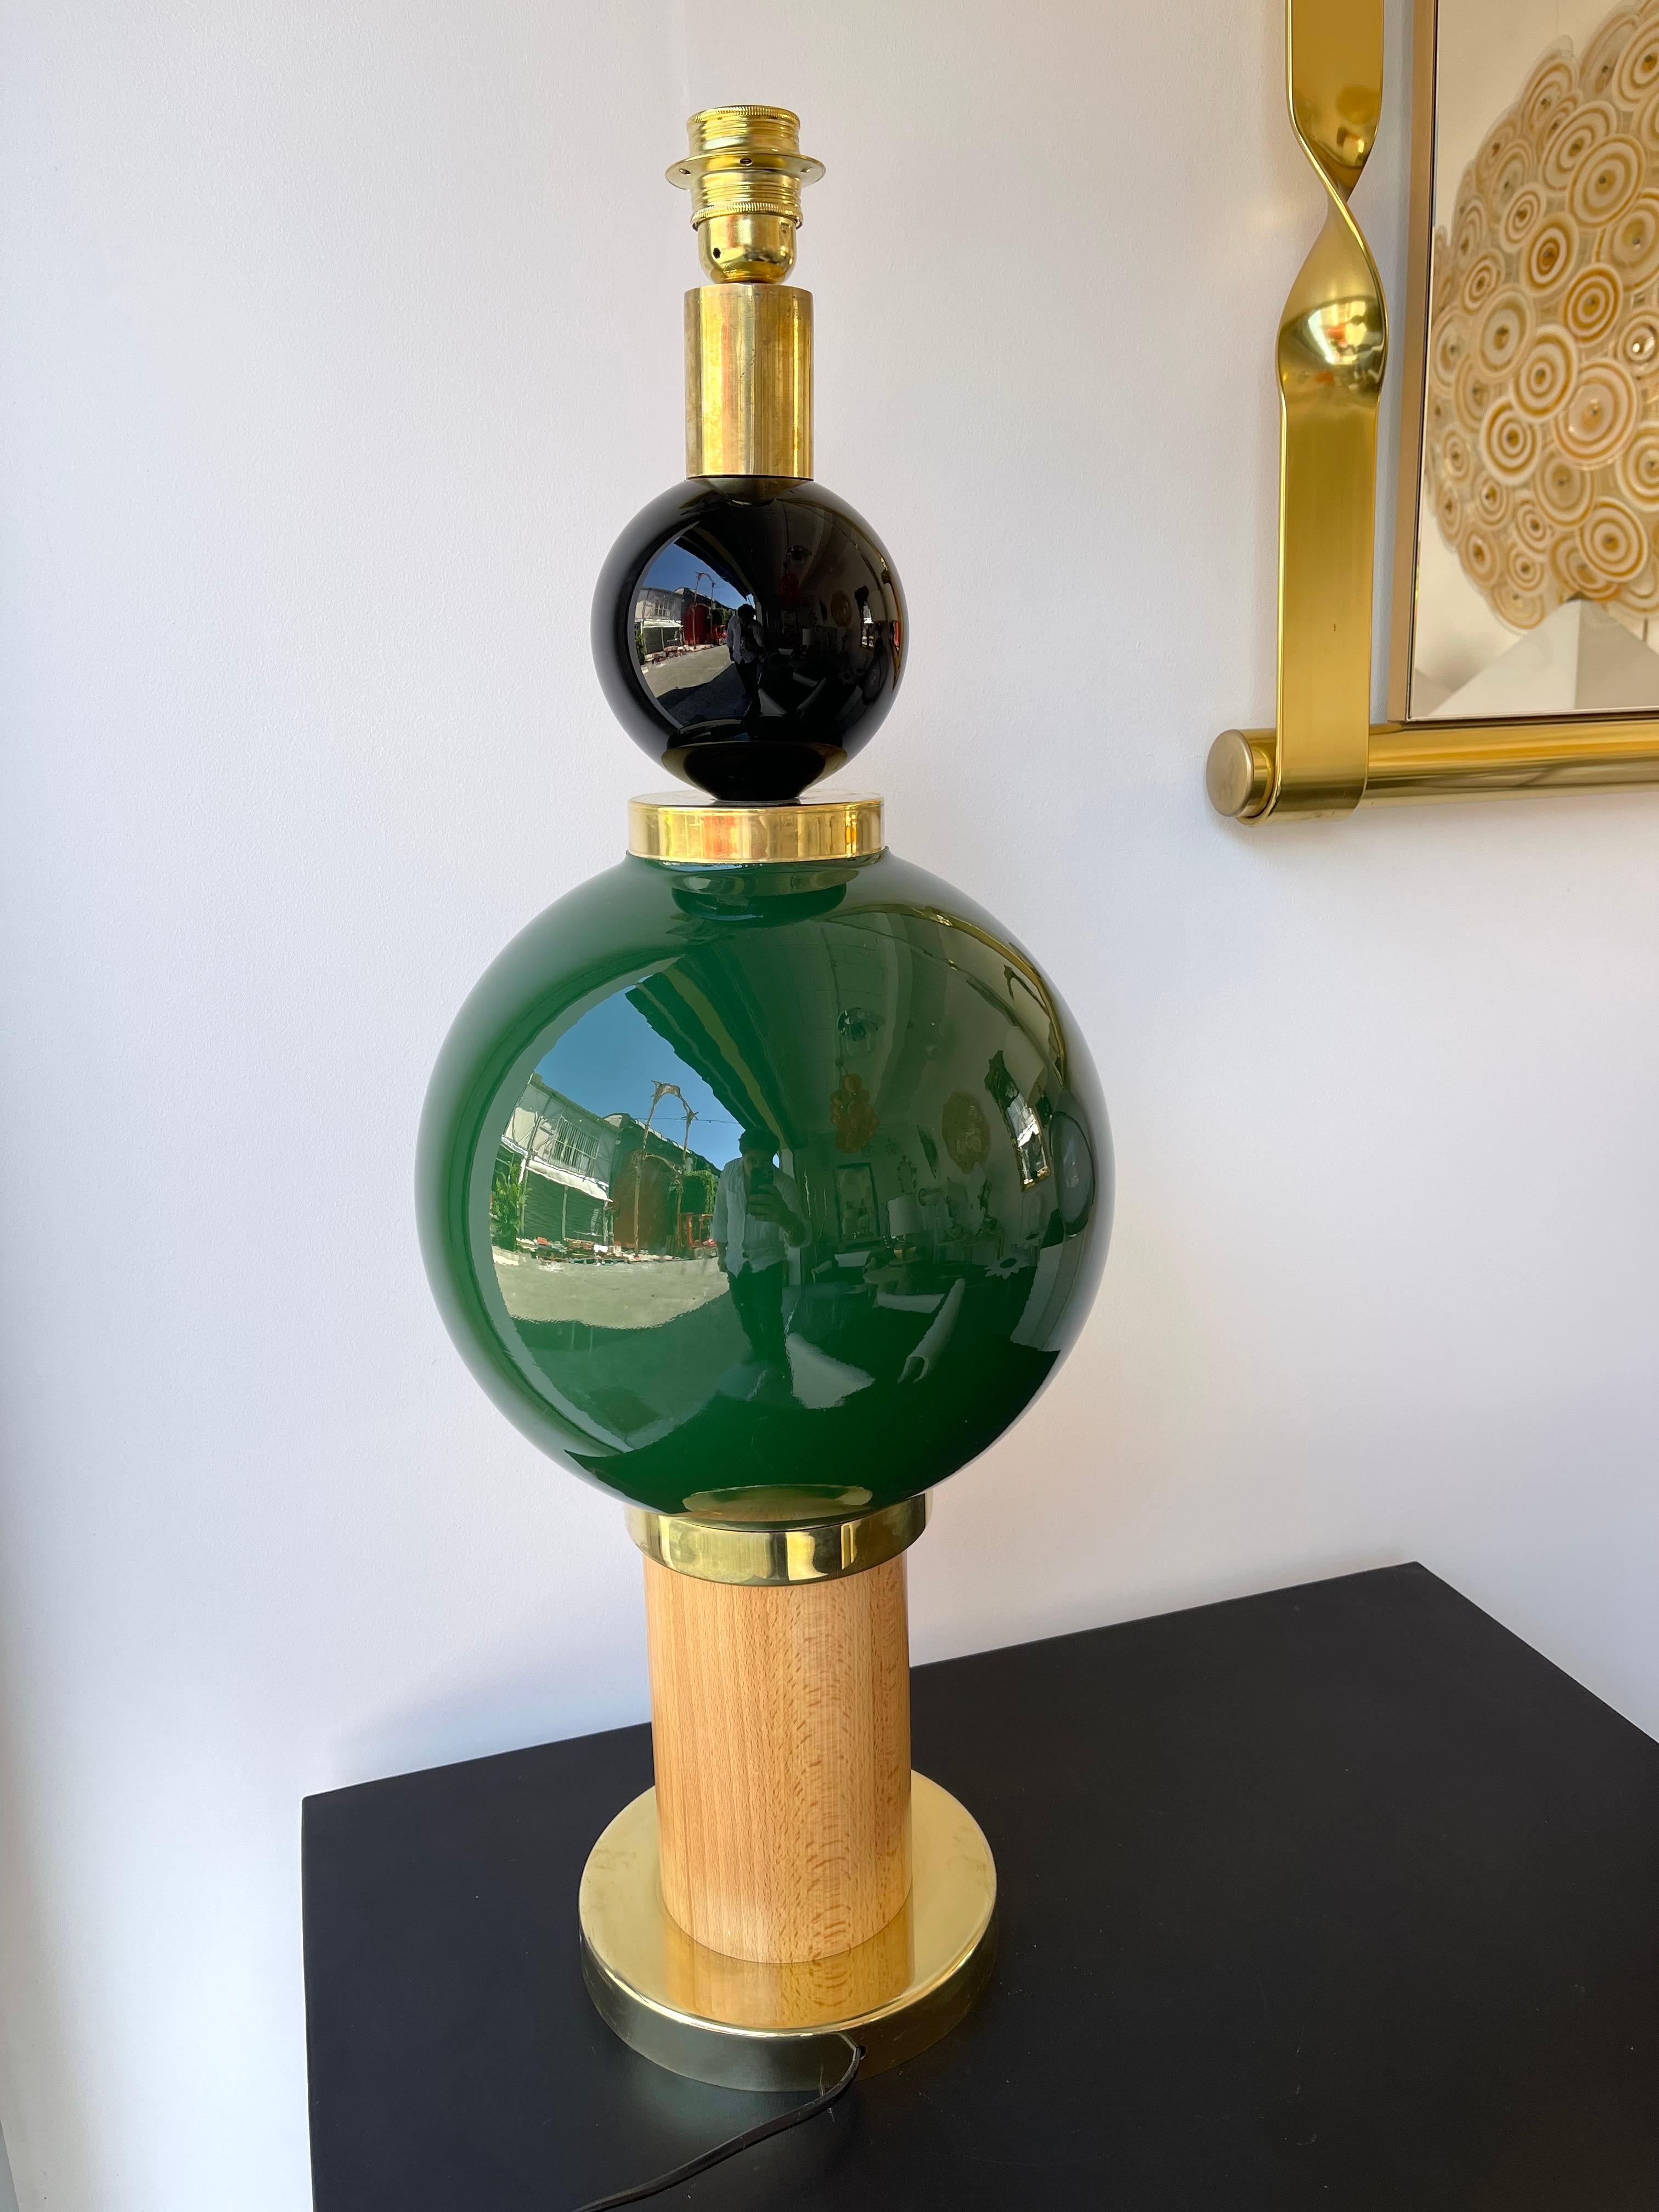 Pair of table or bedside brass lamps, Murano glass and wood. Contemporary work from a small italian artisanal workshop.

Demo shades not included.
Measurements in description with demo shades
Measurements lamp only H 79 x W 28 x D 28 cms.